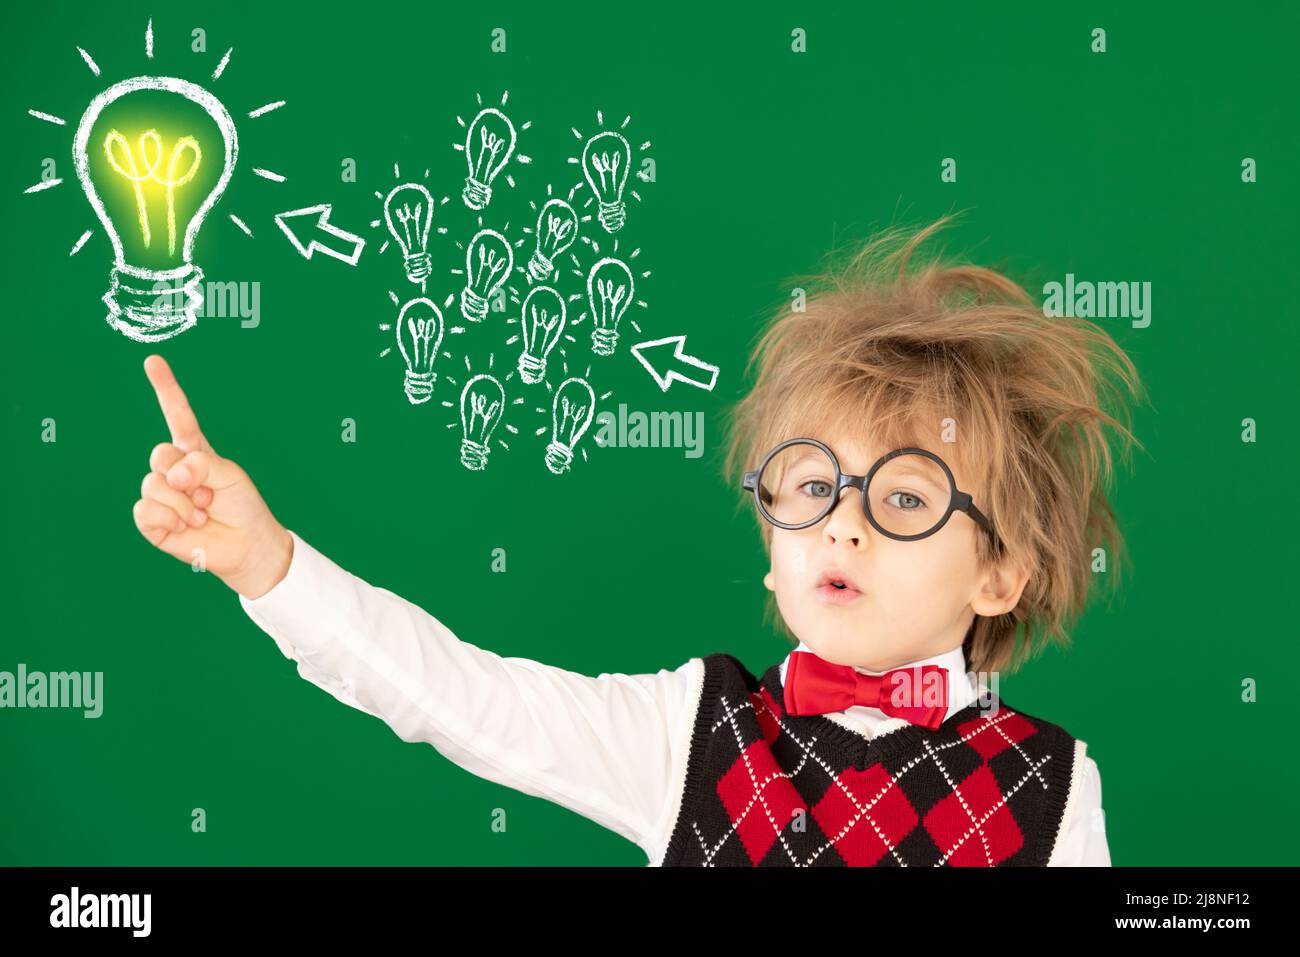 Funny child student in class. Happy kid against green chalkboard. Education concept. Back to school Stock Photo